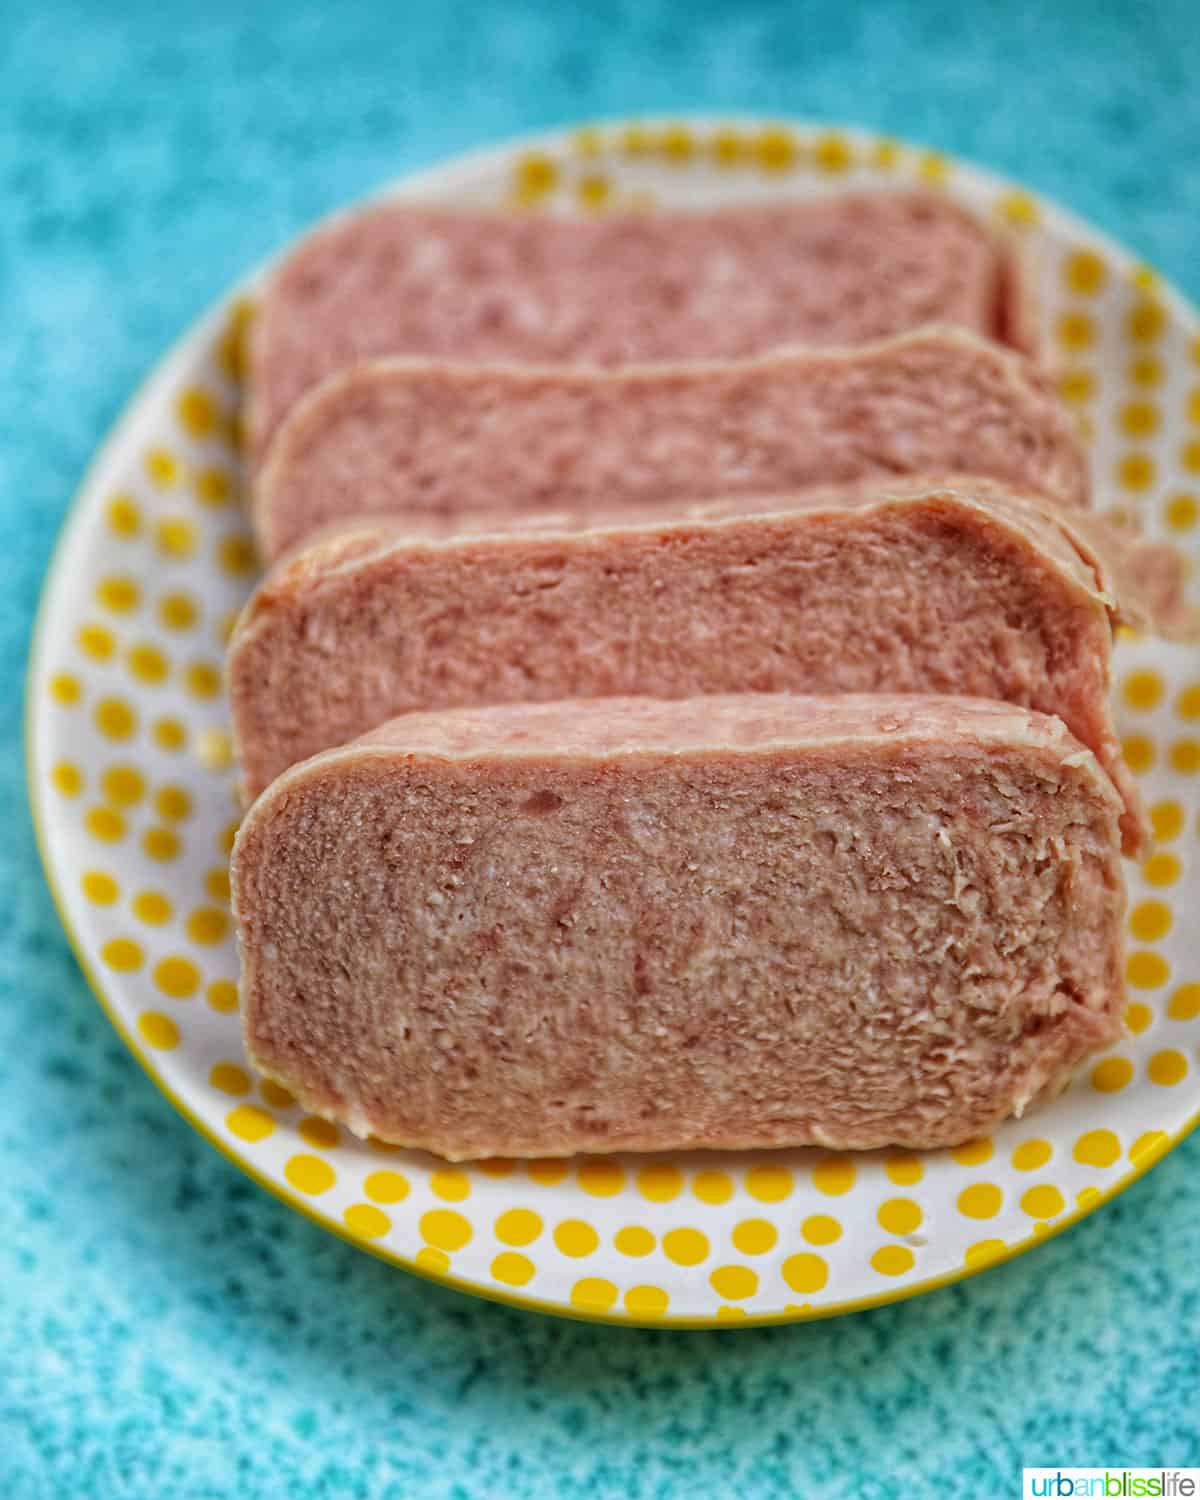 sliced spam on a white plate with yellow polka dots on a blue table.